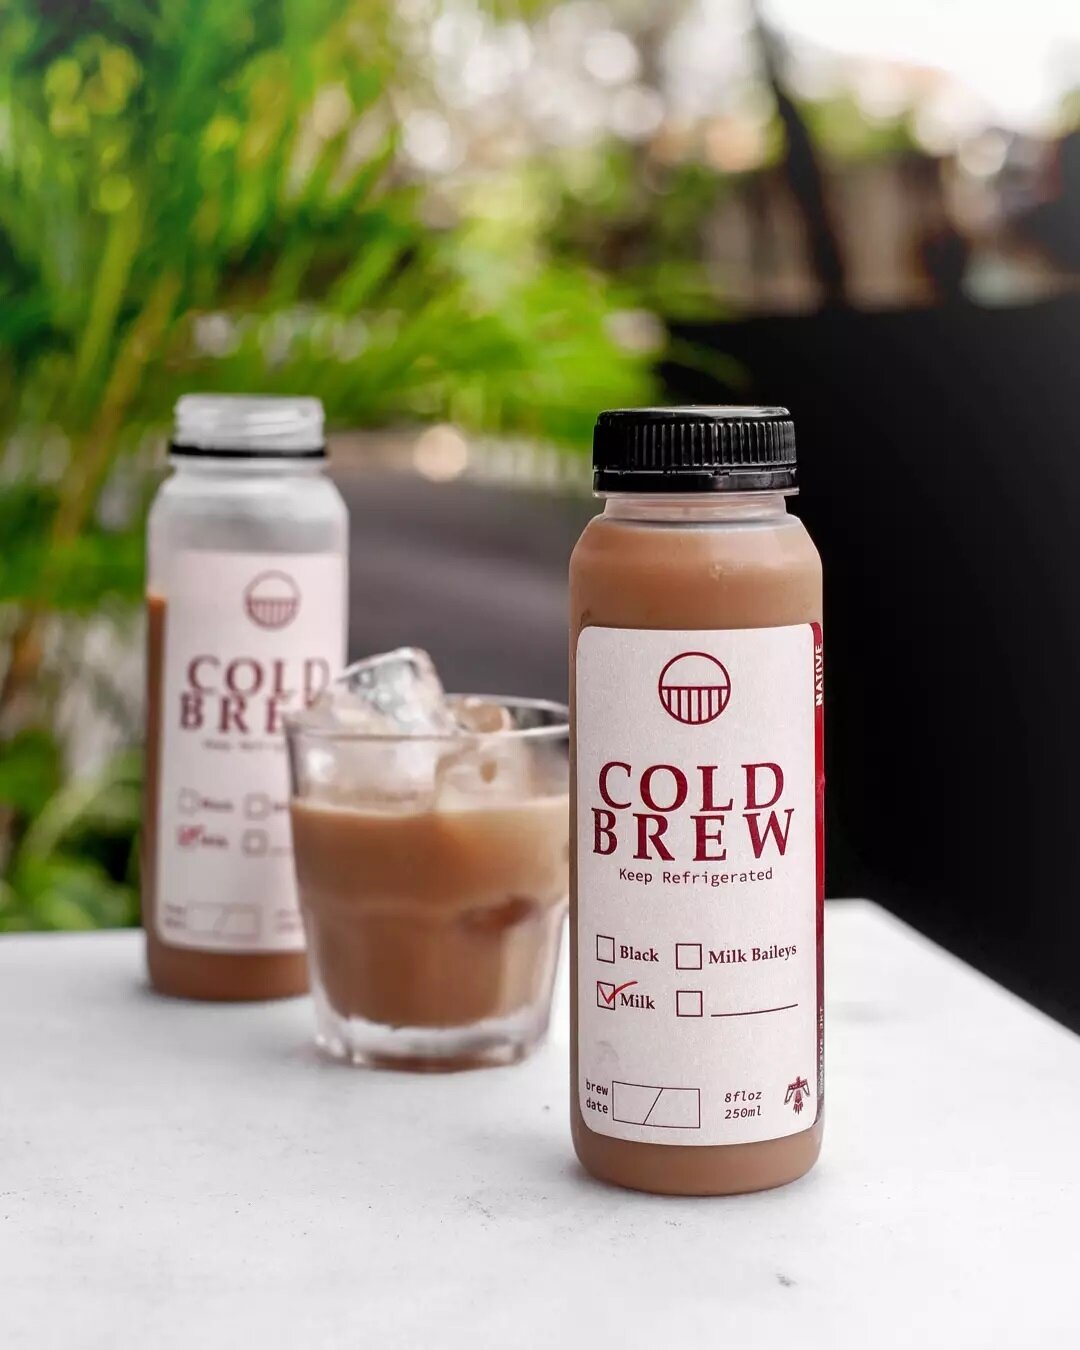 In a rush and haven't had your daily dose of coffee? Swing by and grab your cold brew coffee on the go! ✨
-
#nativejkt
#nativesaumata #nativecoffeetribe #instadaily #instagood #foodporn #food #foodies #foodism #coffeeshop #cafelife #instalike #foodph